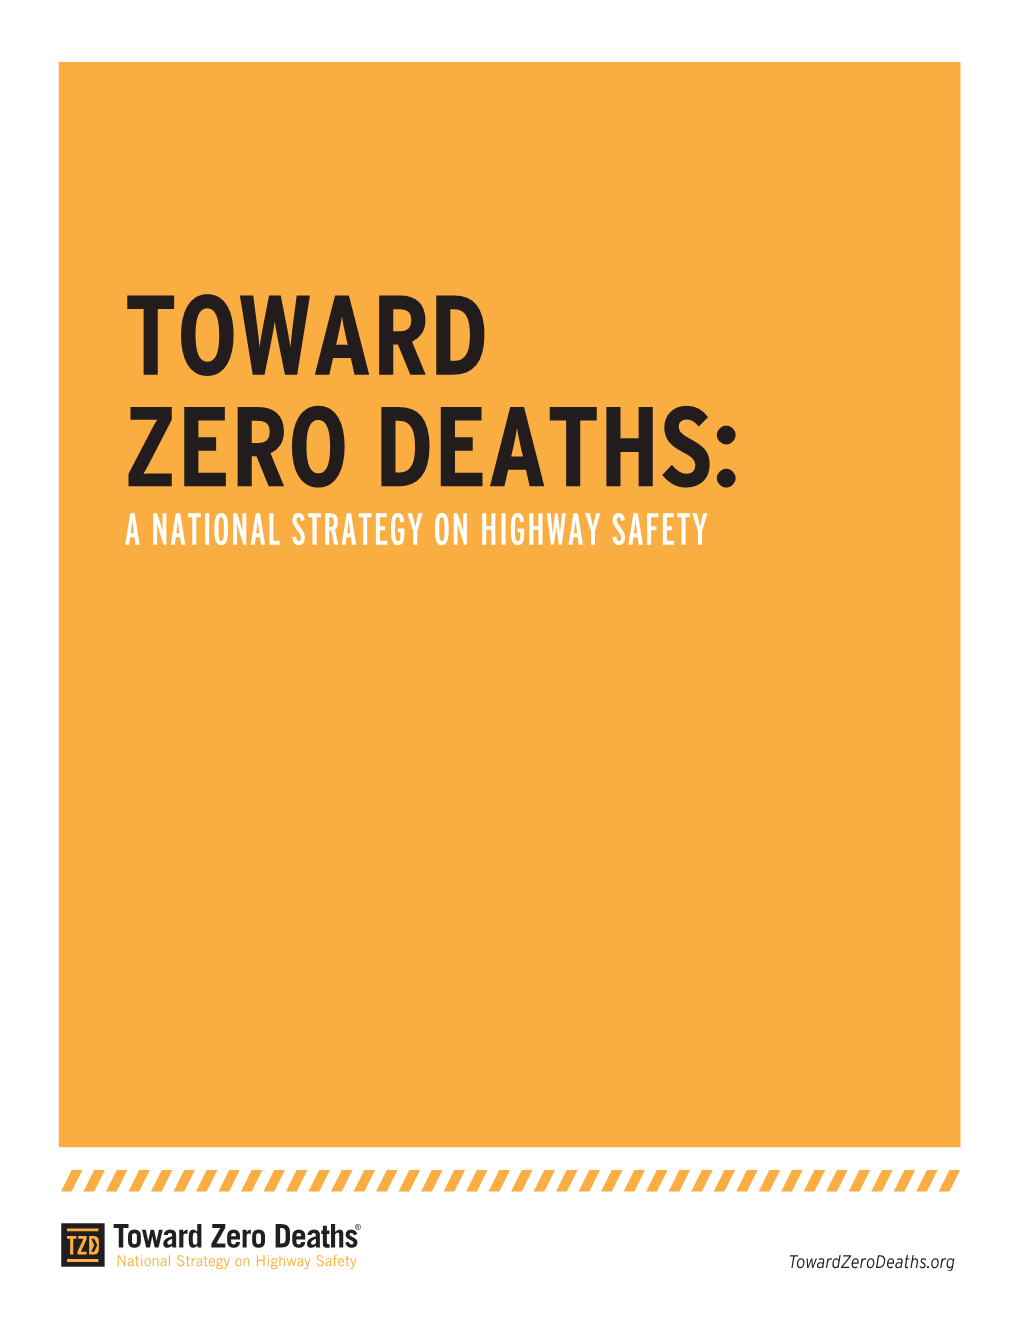 TZD: National Strategy on Highway Safety